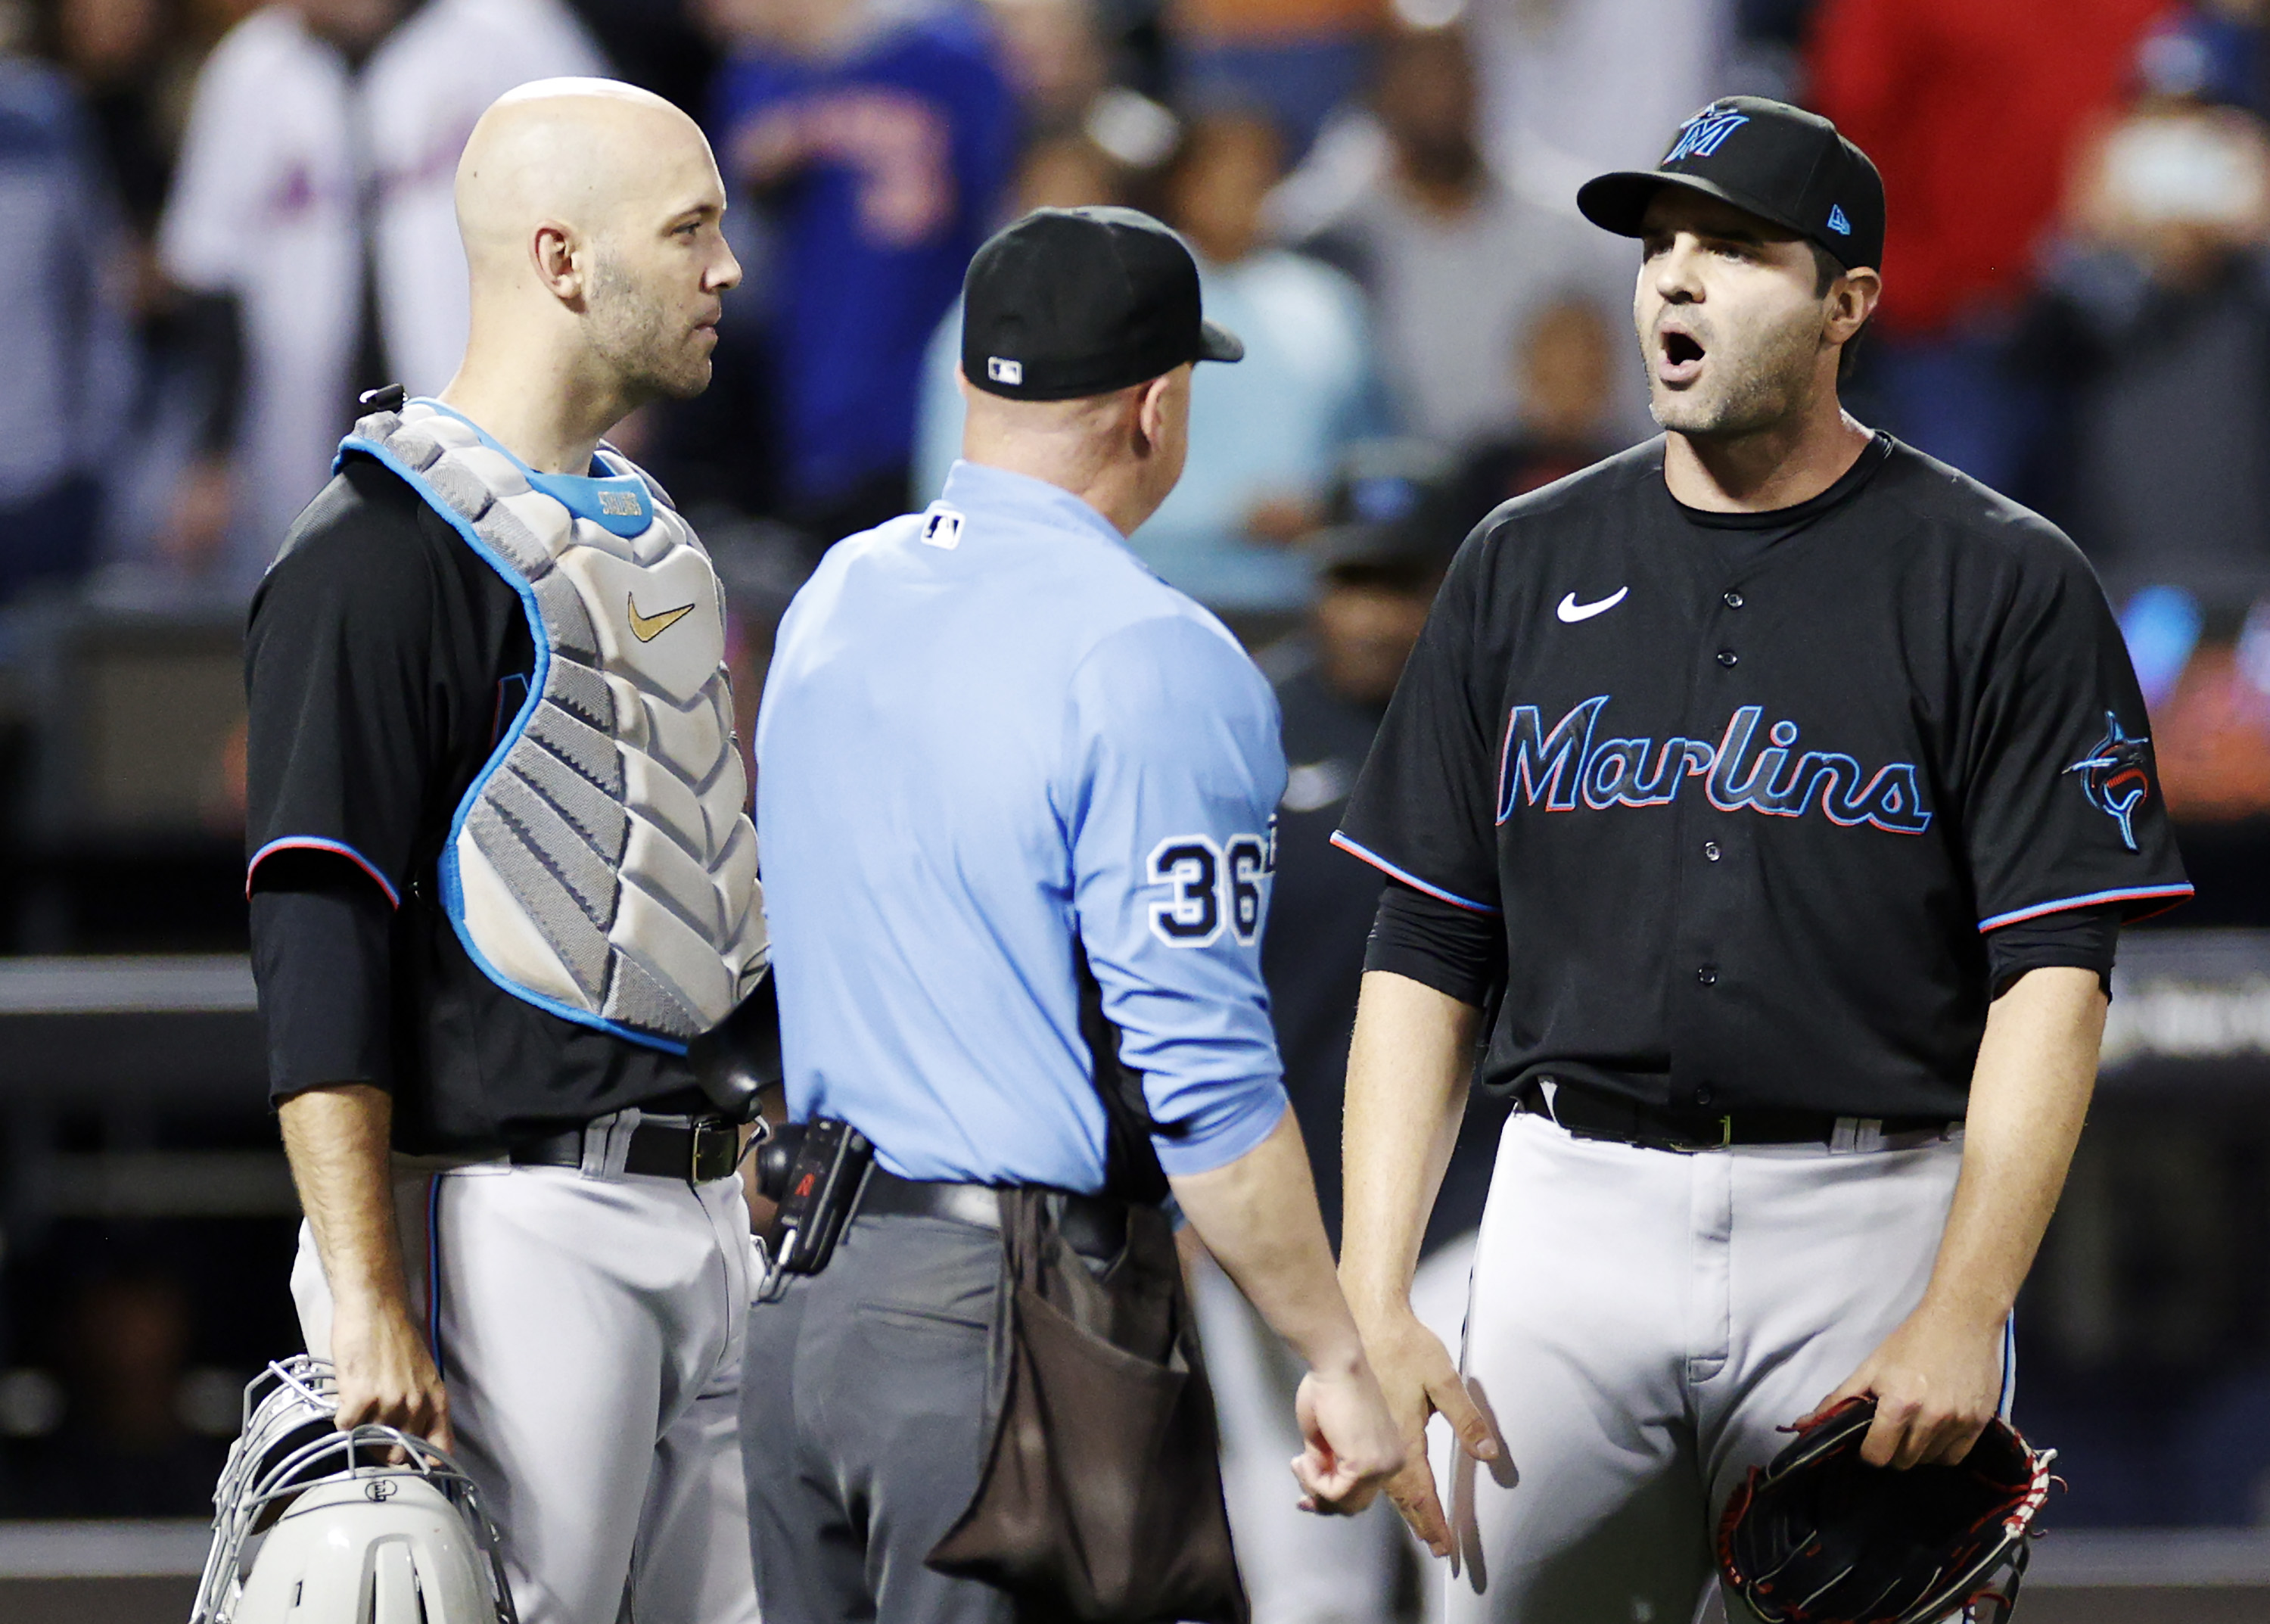 Marlins reliever Richard Bleier looking incredulous after being called for the last of three straight balks in a game against the Mets on September 27, 2022.